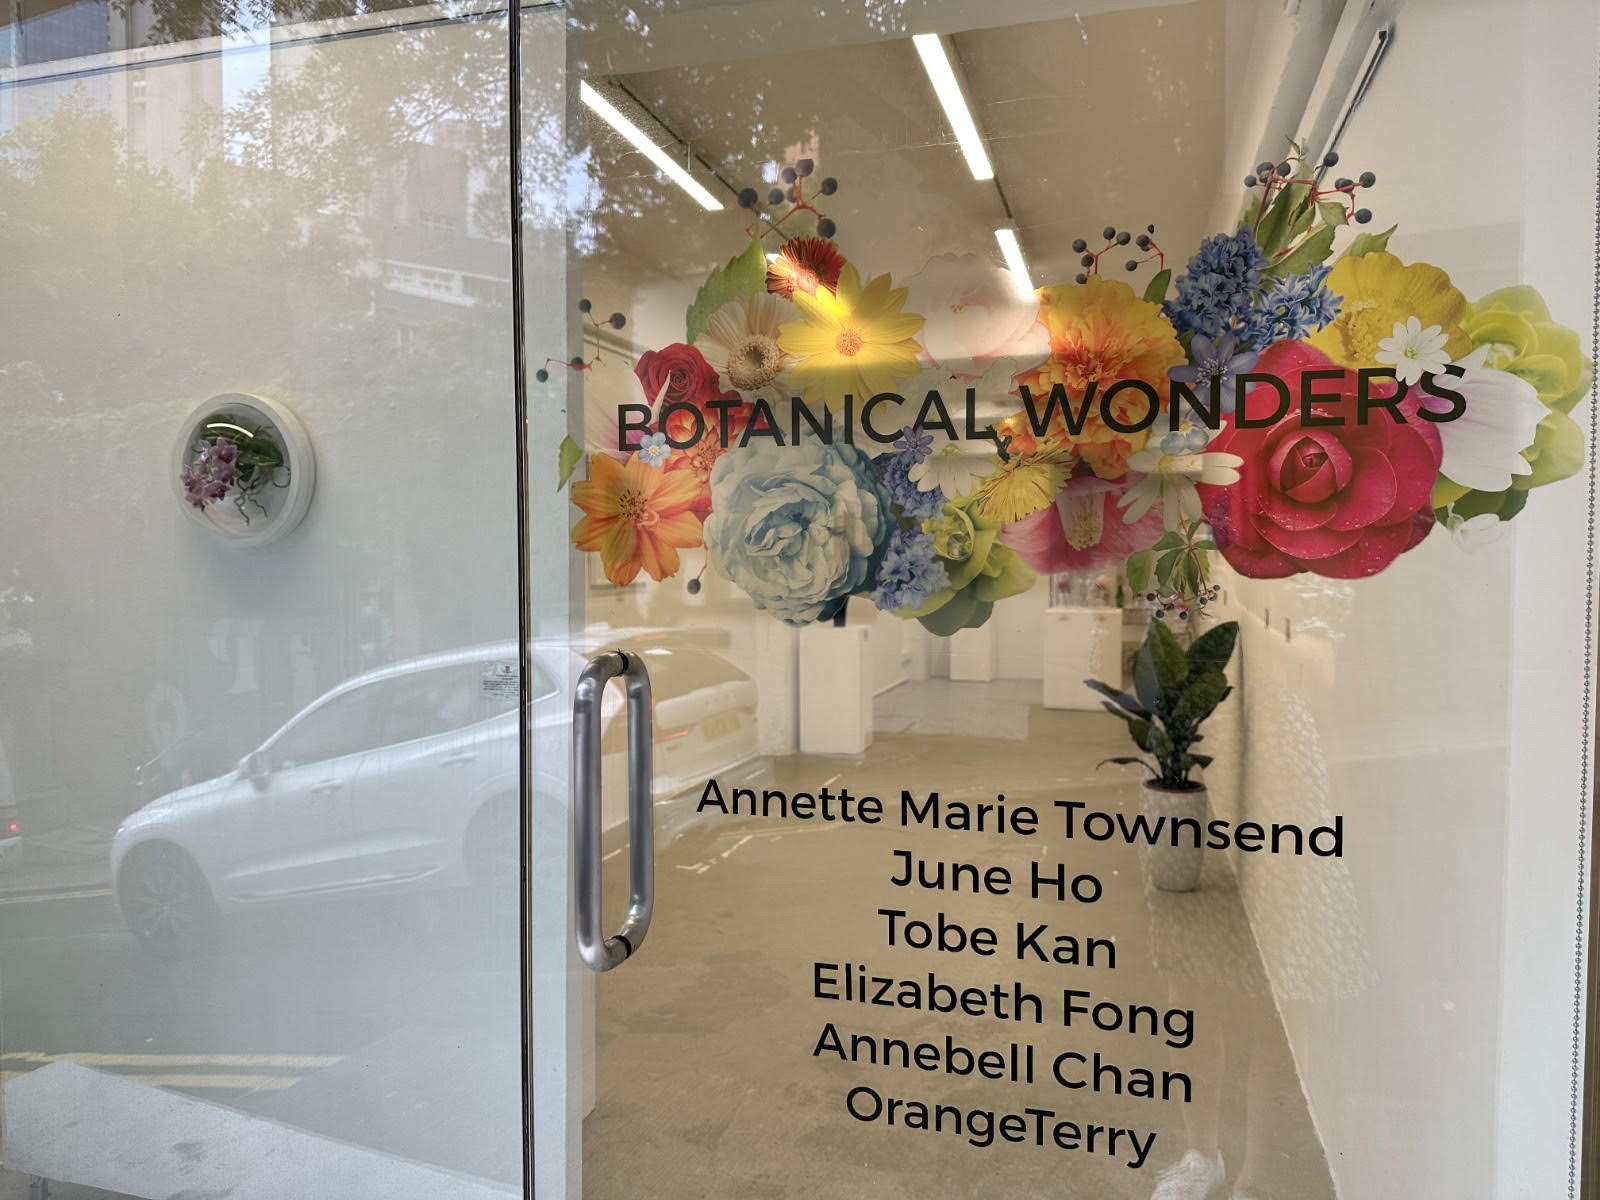 Annette's name printed on the glass door entrance to the Botanical Wonders show at Karin Weber Gallery Hong Kong